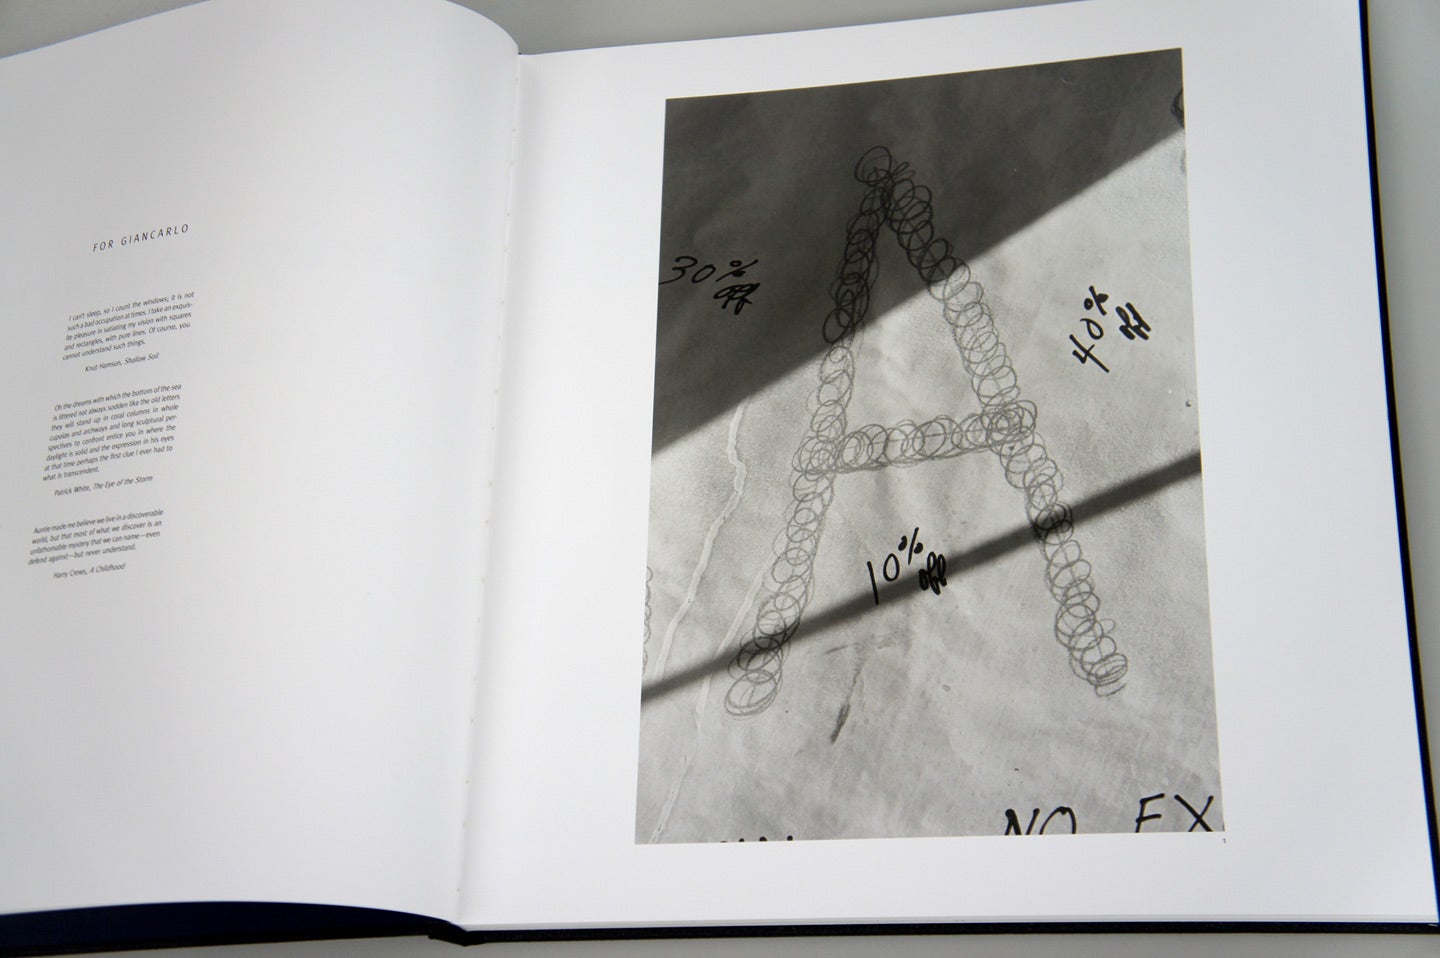 Lee Friedlander: Letters from the People (Special Limited Edition with One Vintage Gelatin Silver Print: "T")